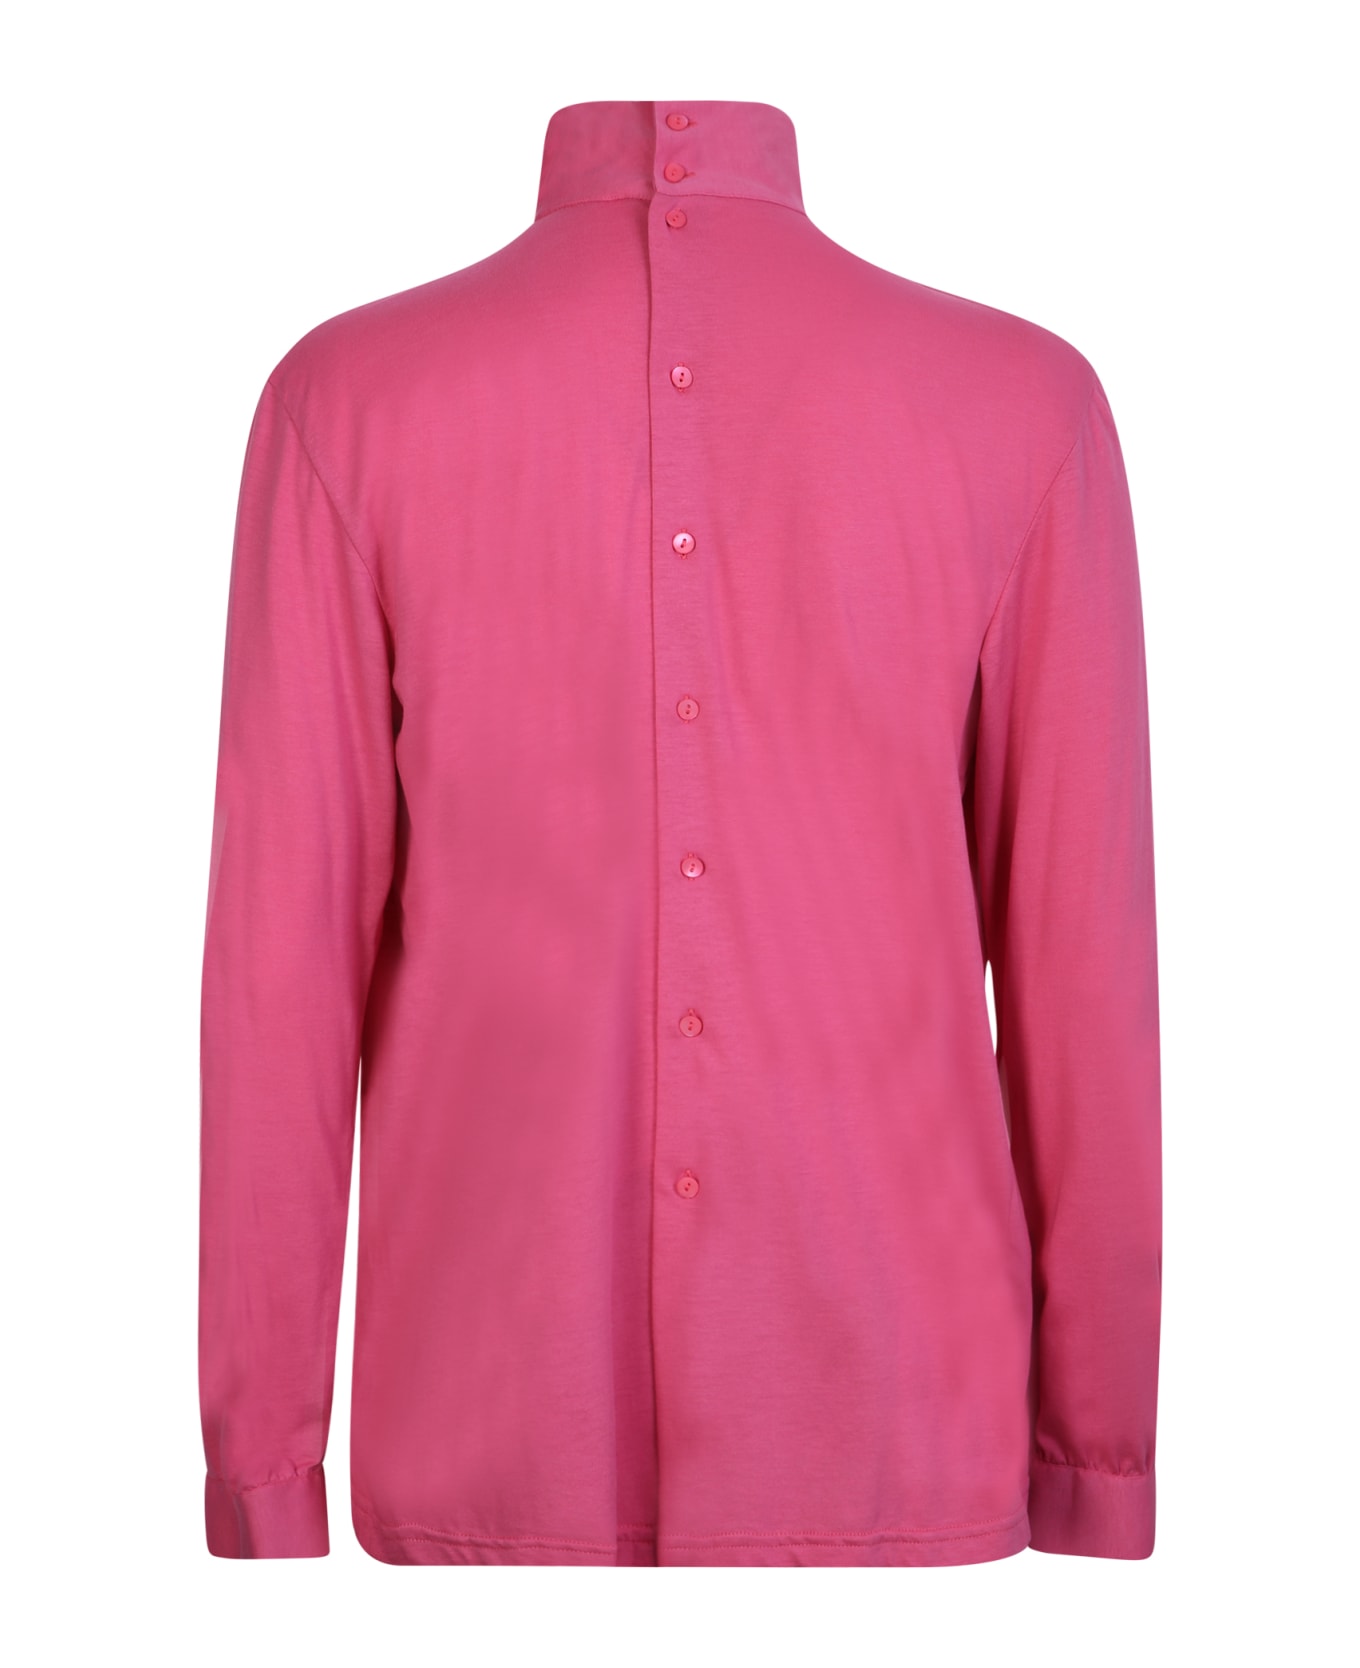 Xacus High Neck Blouse In Pink - Pink